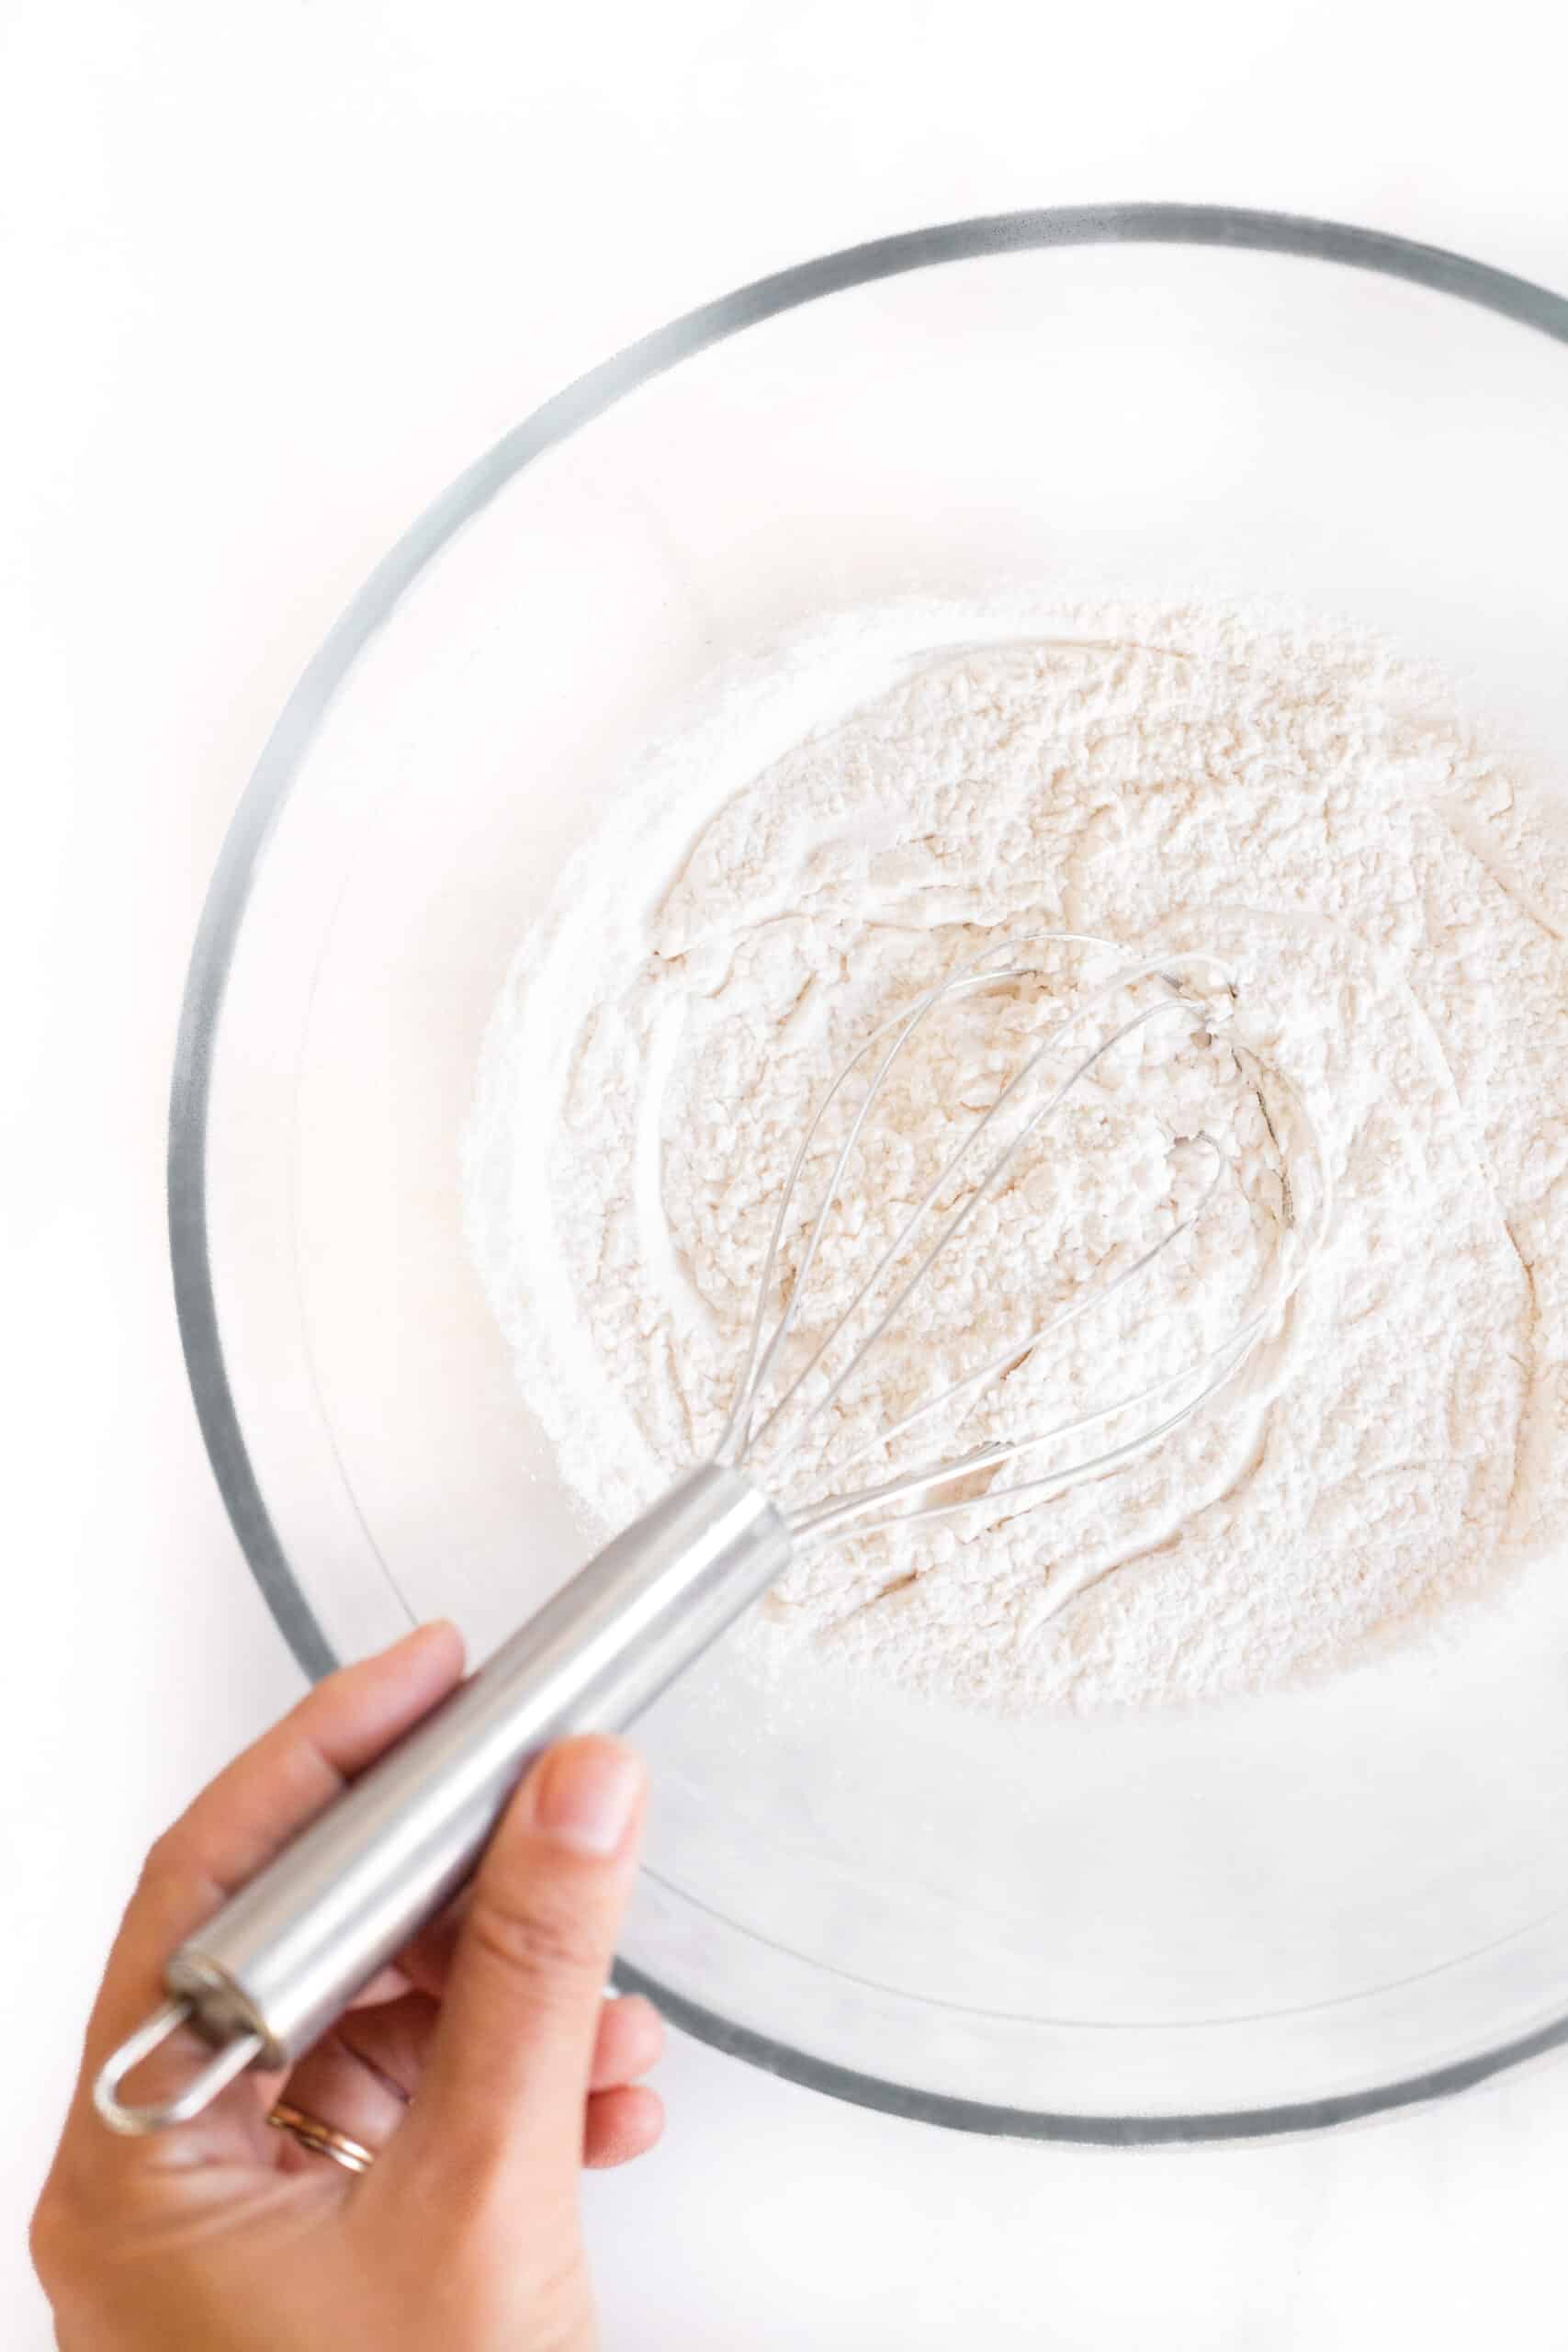 Hand whisking flour mixture in a large glass bowl.